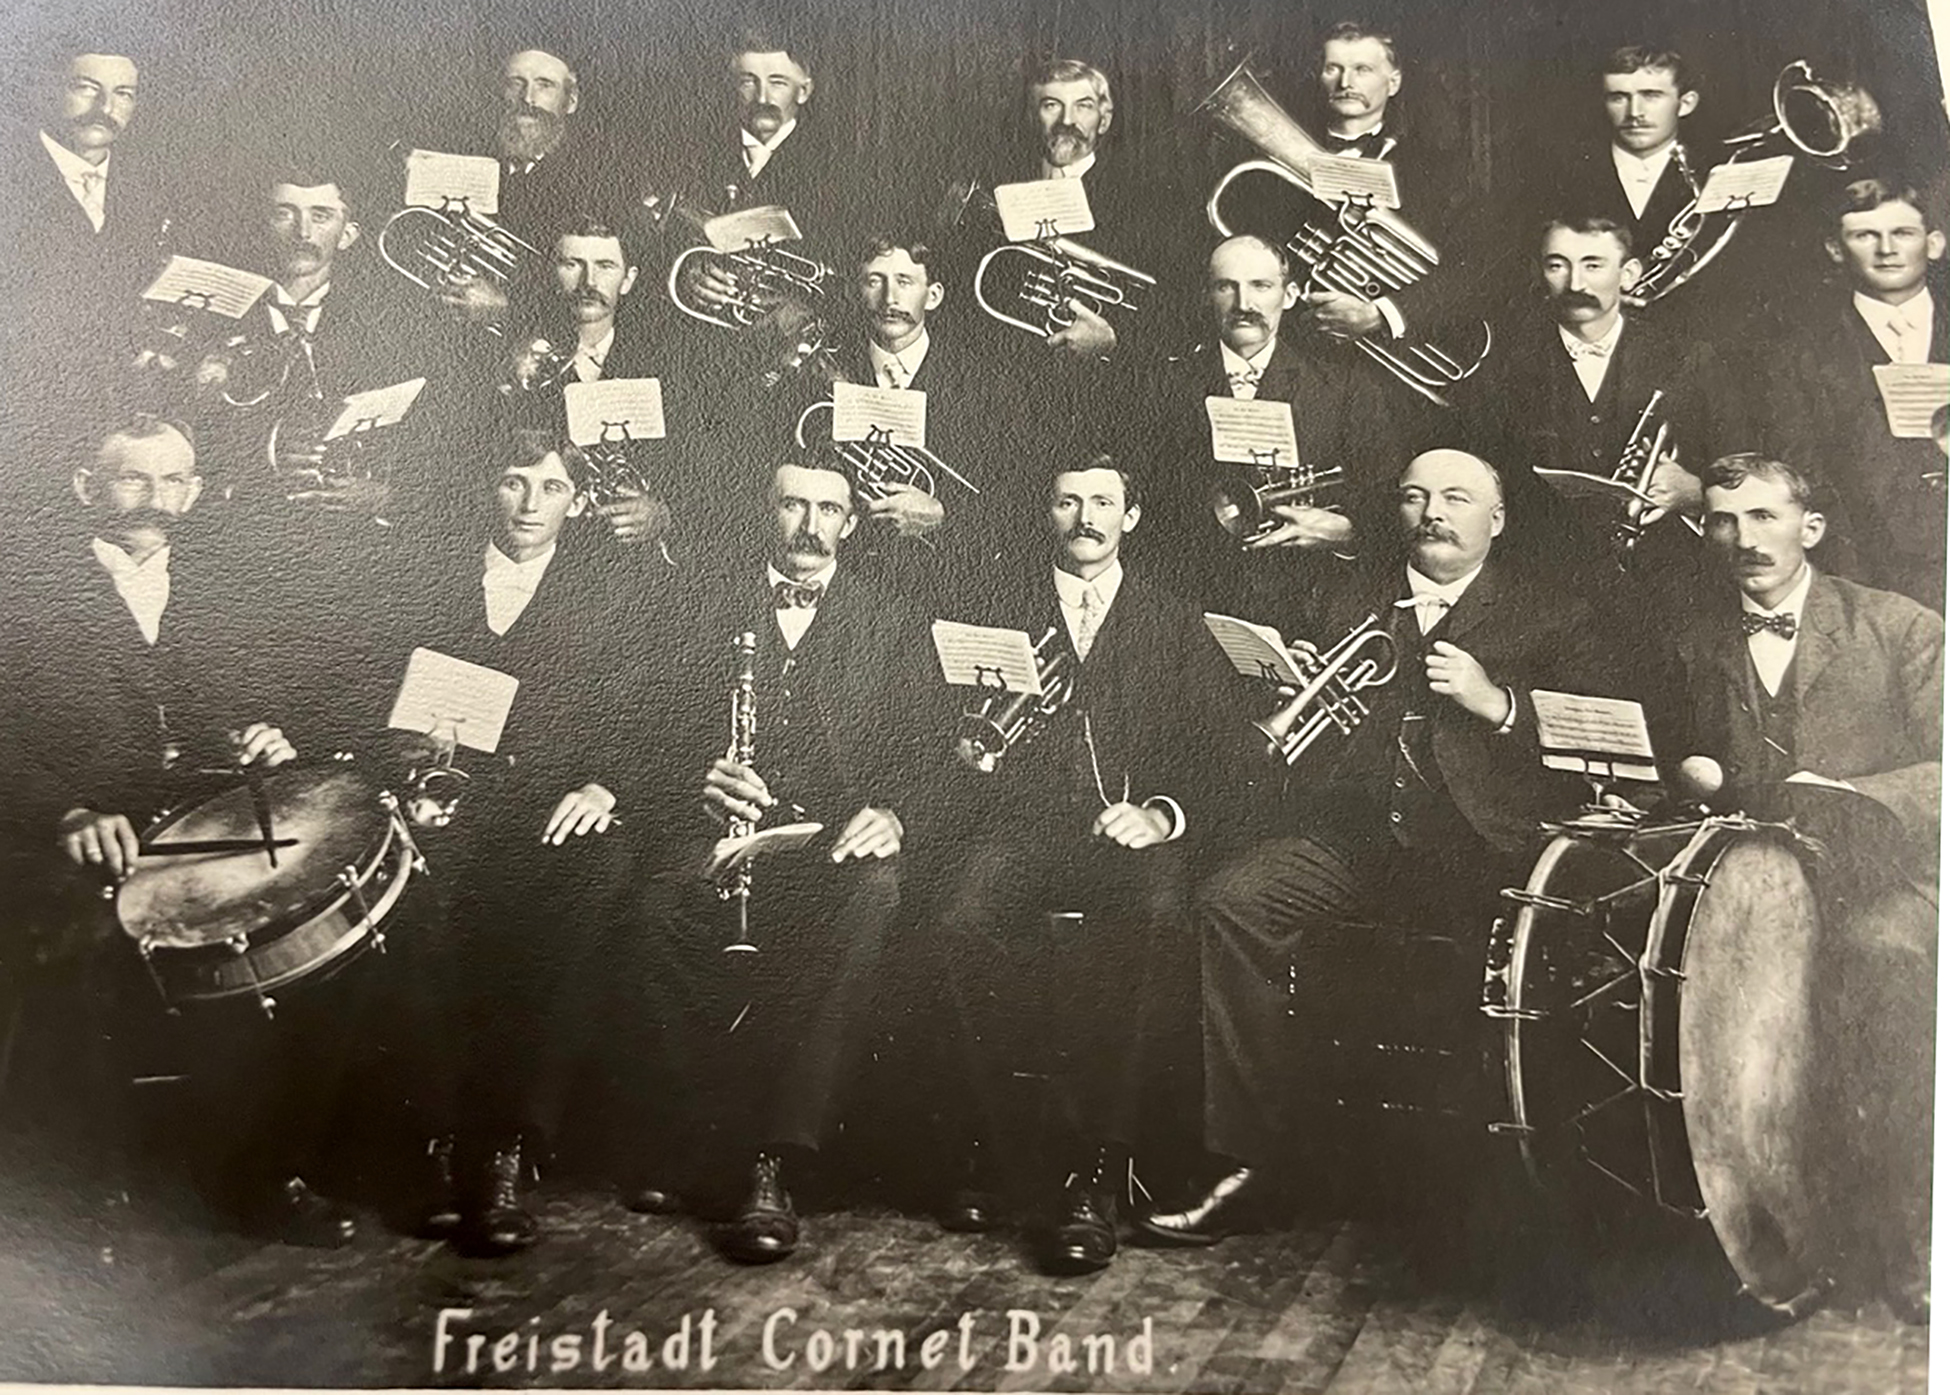 Freistadt Cornet Band poses for a photo with their instruments in 1901.